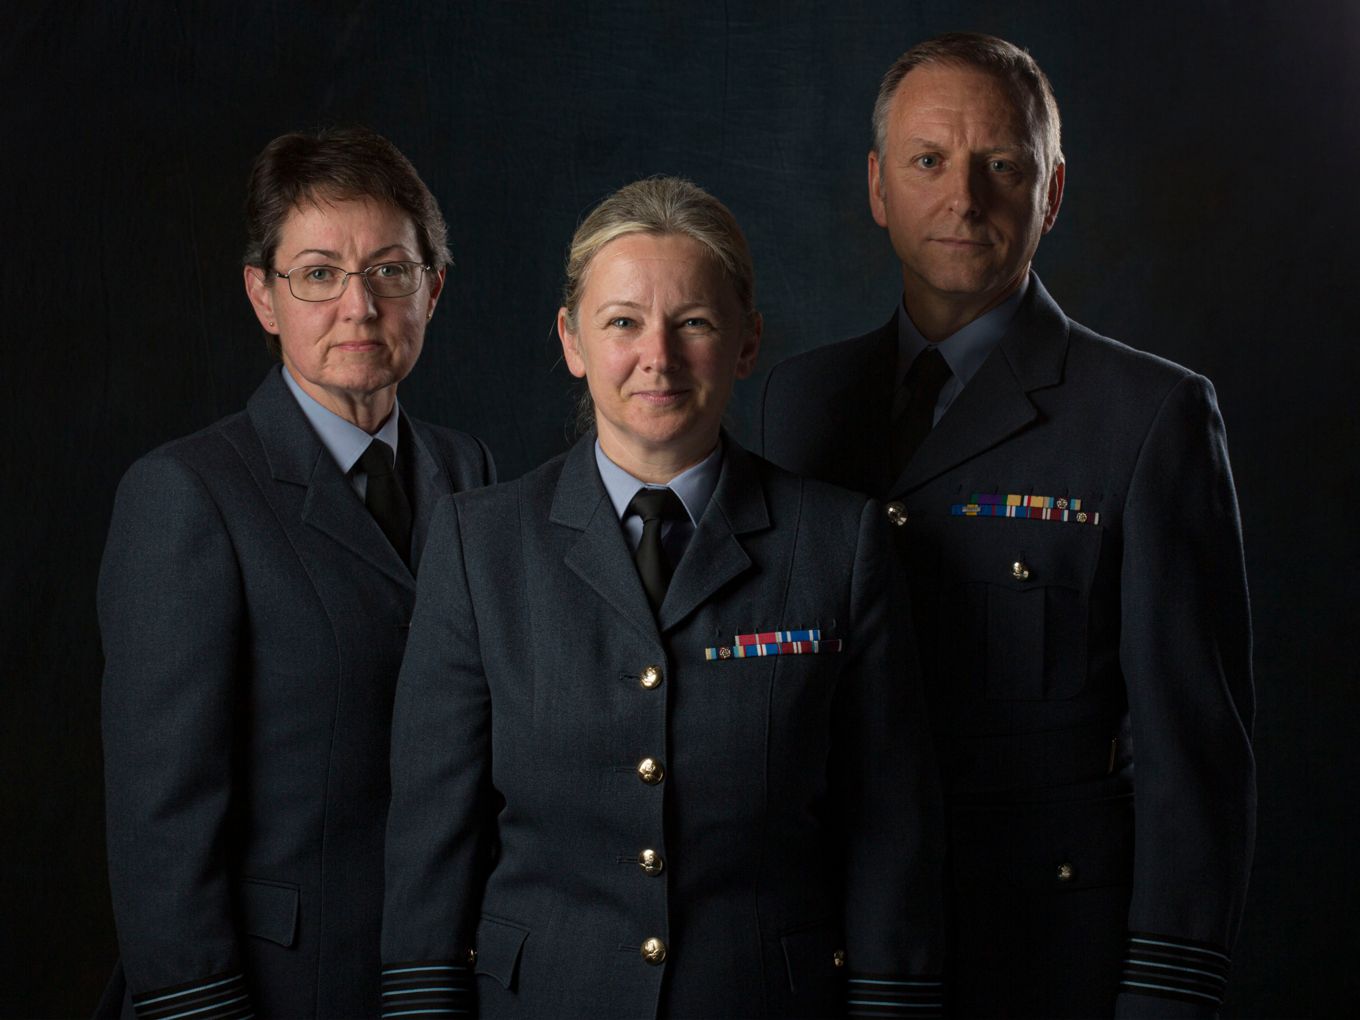 From left to right: Wing Commander Maggie Boyle, Group Captain Jo Lincoln, Wing Commander Andy Valentine.